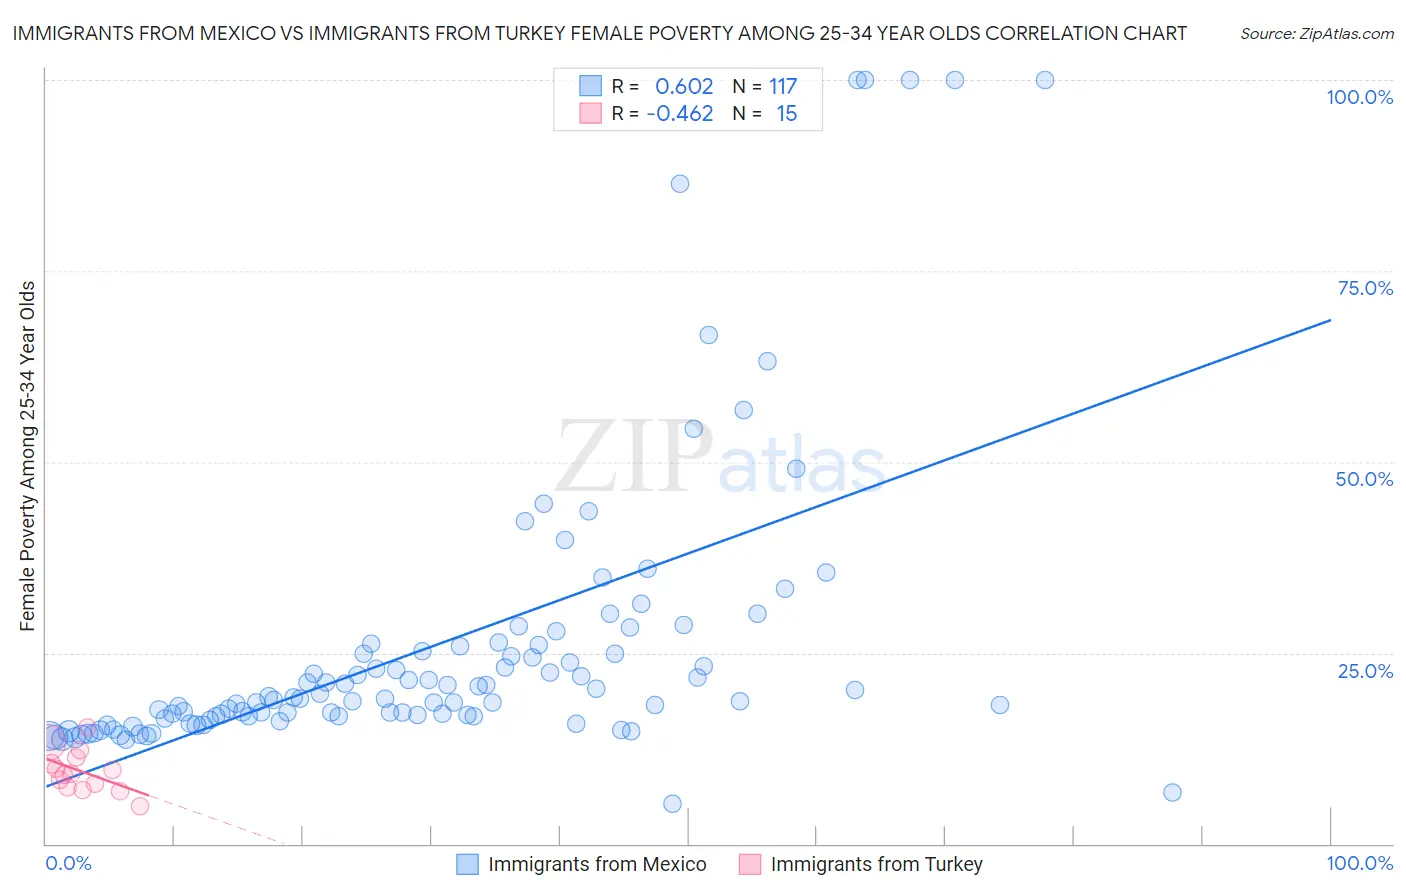 Immigrants from Mexico vs Immigrants from Turkey Female Poverty Among 25-34 Year Olds